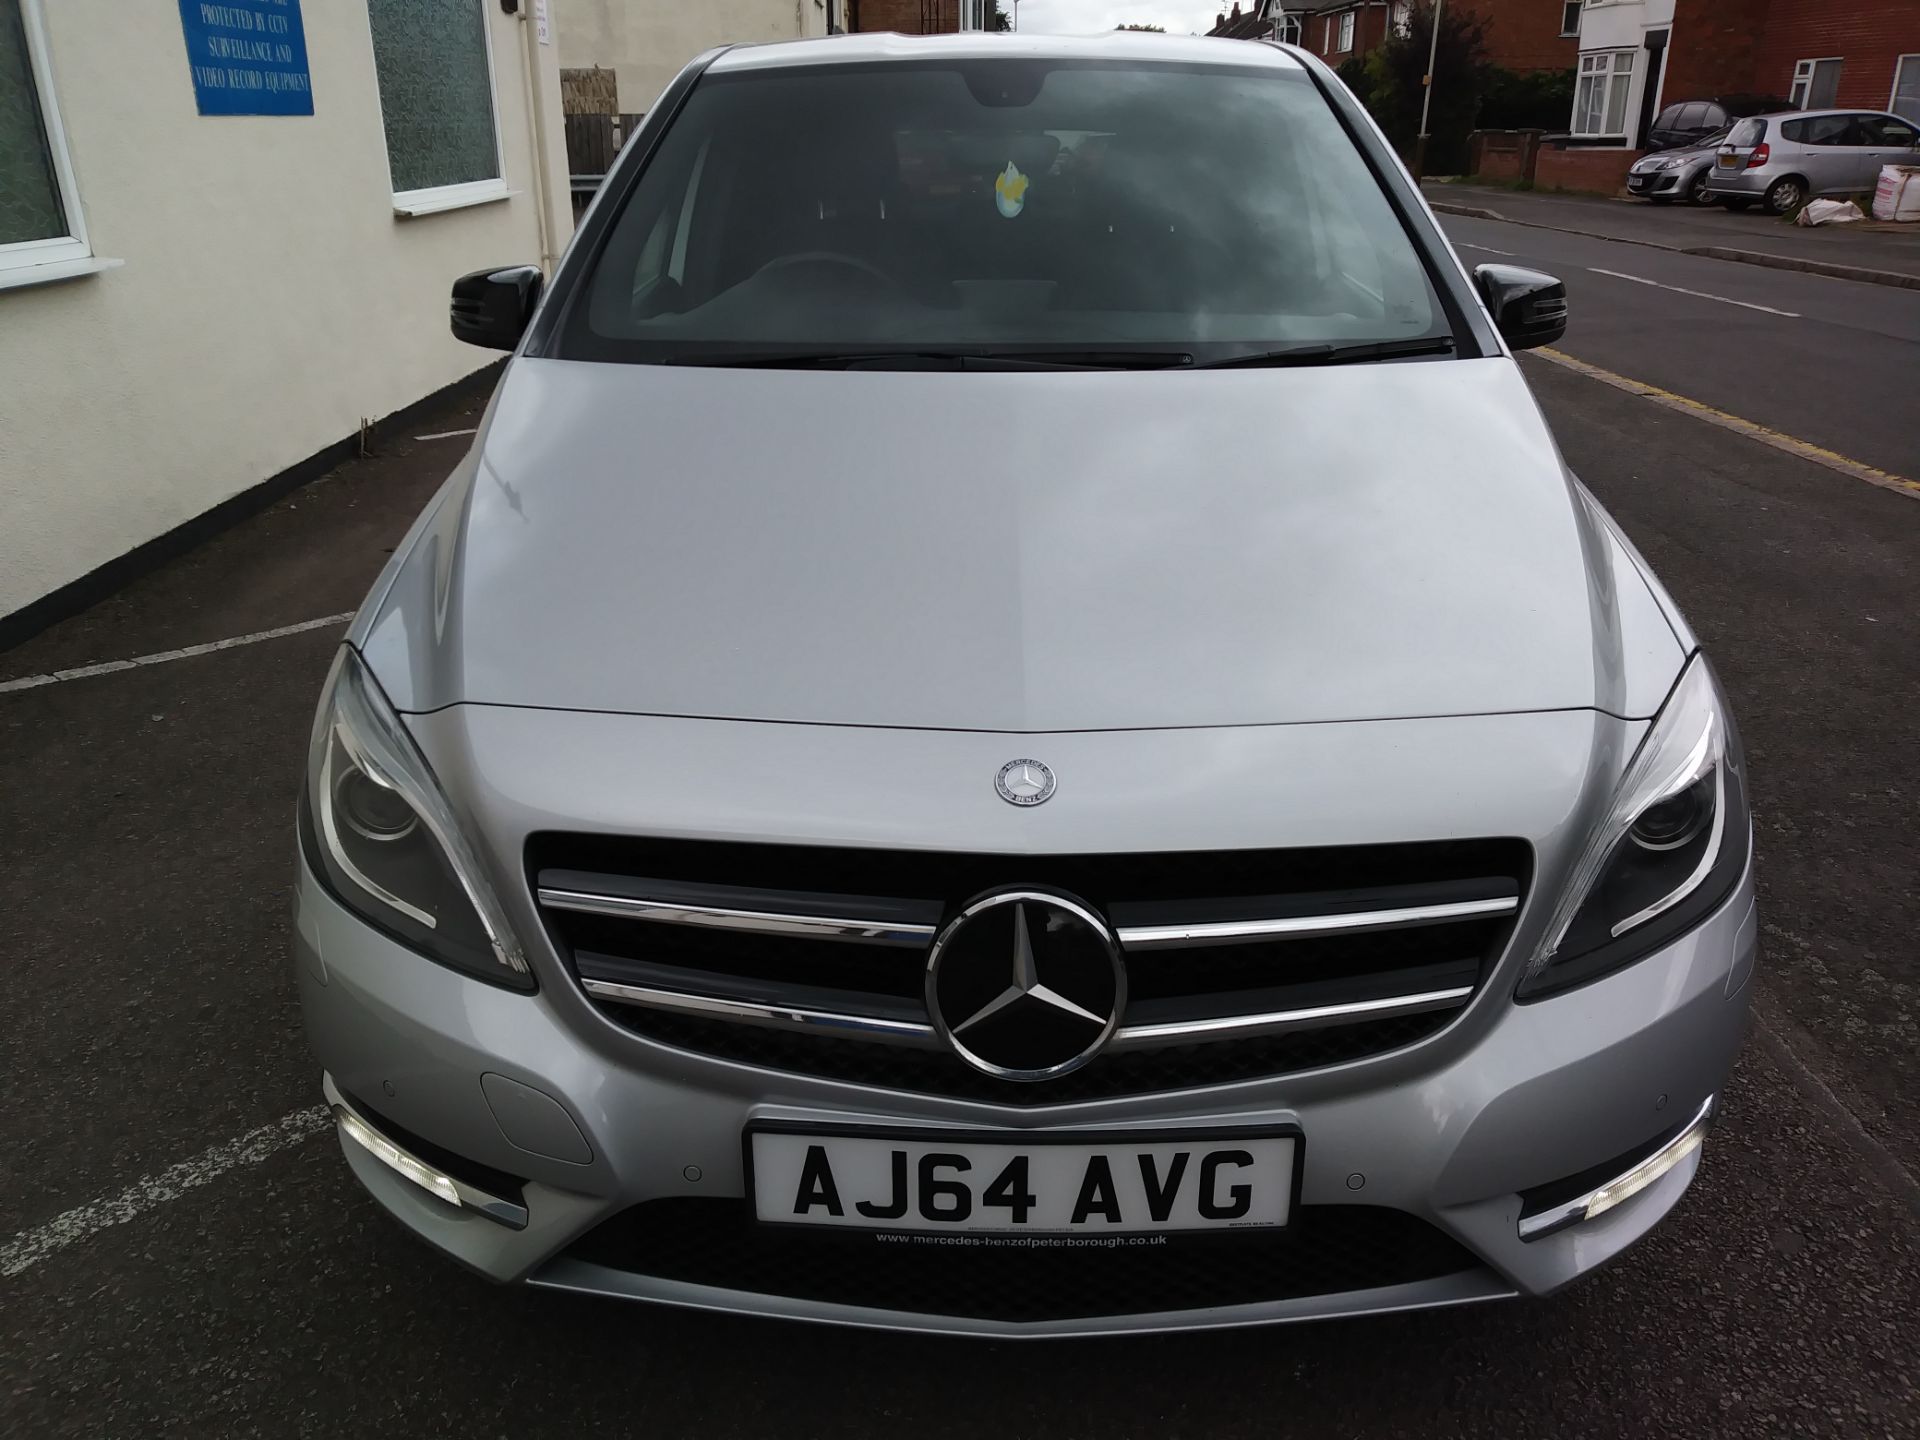 Mercedes B Class 1.5 B180 CDI Sport 7G-DCT 5dr - Automatic, Diesel, 103000 Miles - Image 3 of 39